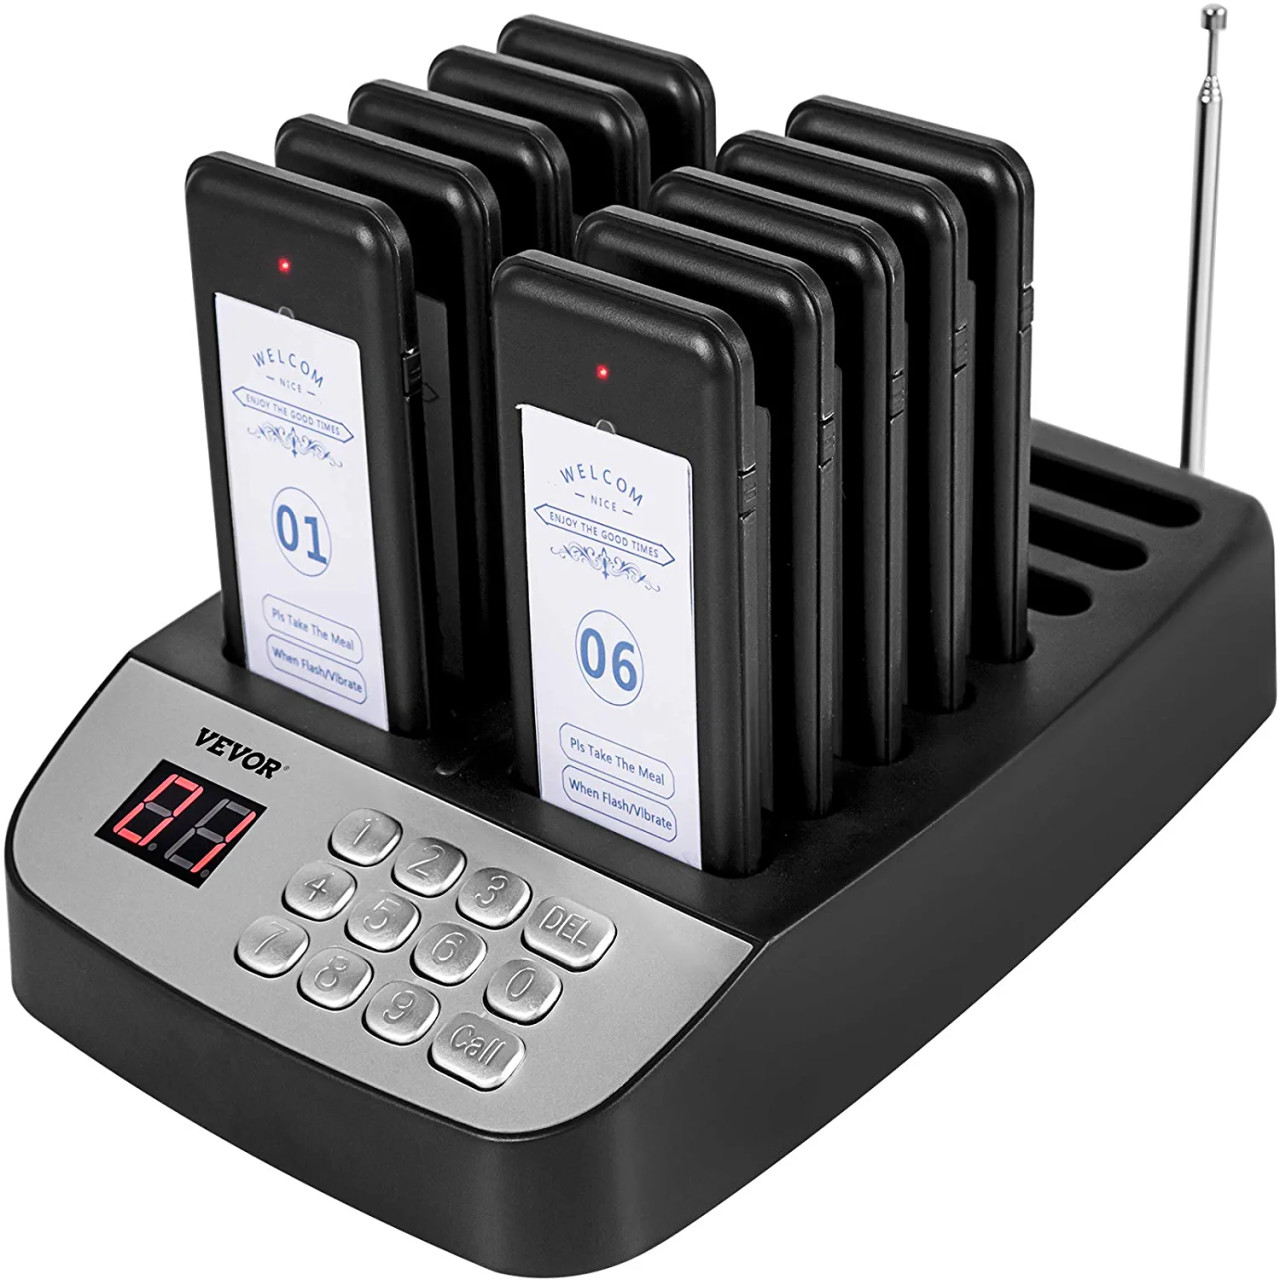 F100 Restaurant Pager System 10 Pagers, Max 98 Beepers Wireless Calling System, Set with Vibration, Flashing and Buzzer for Church, Nurse,Hospital & Hotel